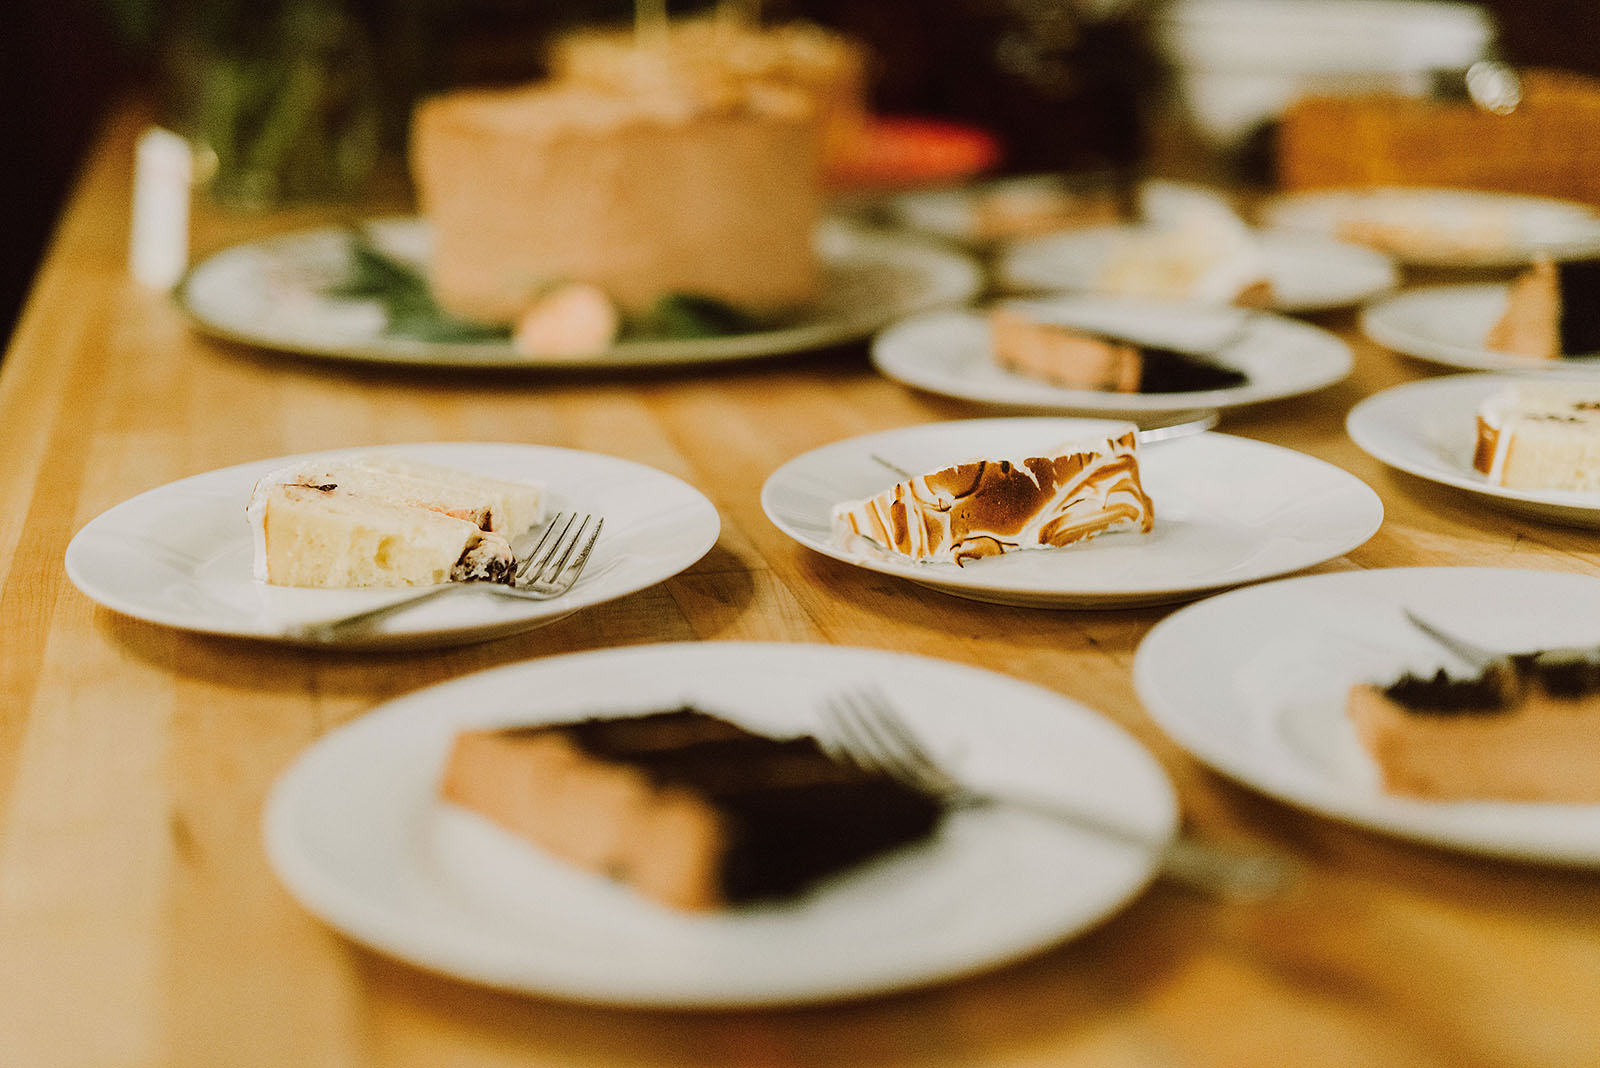 Slices of wedding cake at Elder Hall for an intimate Ned Ludd wedding